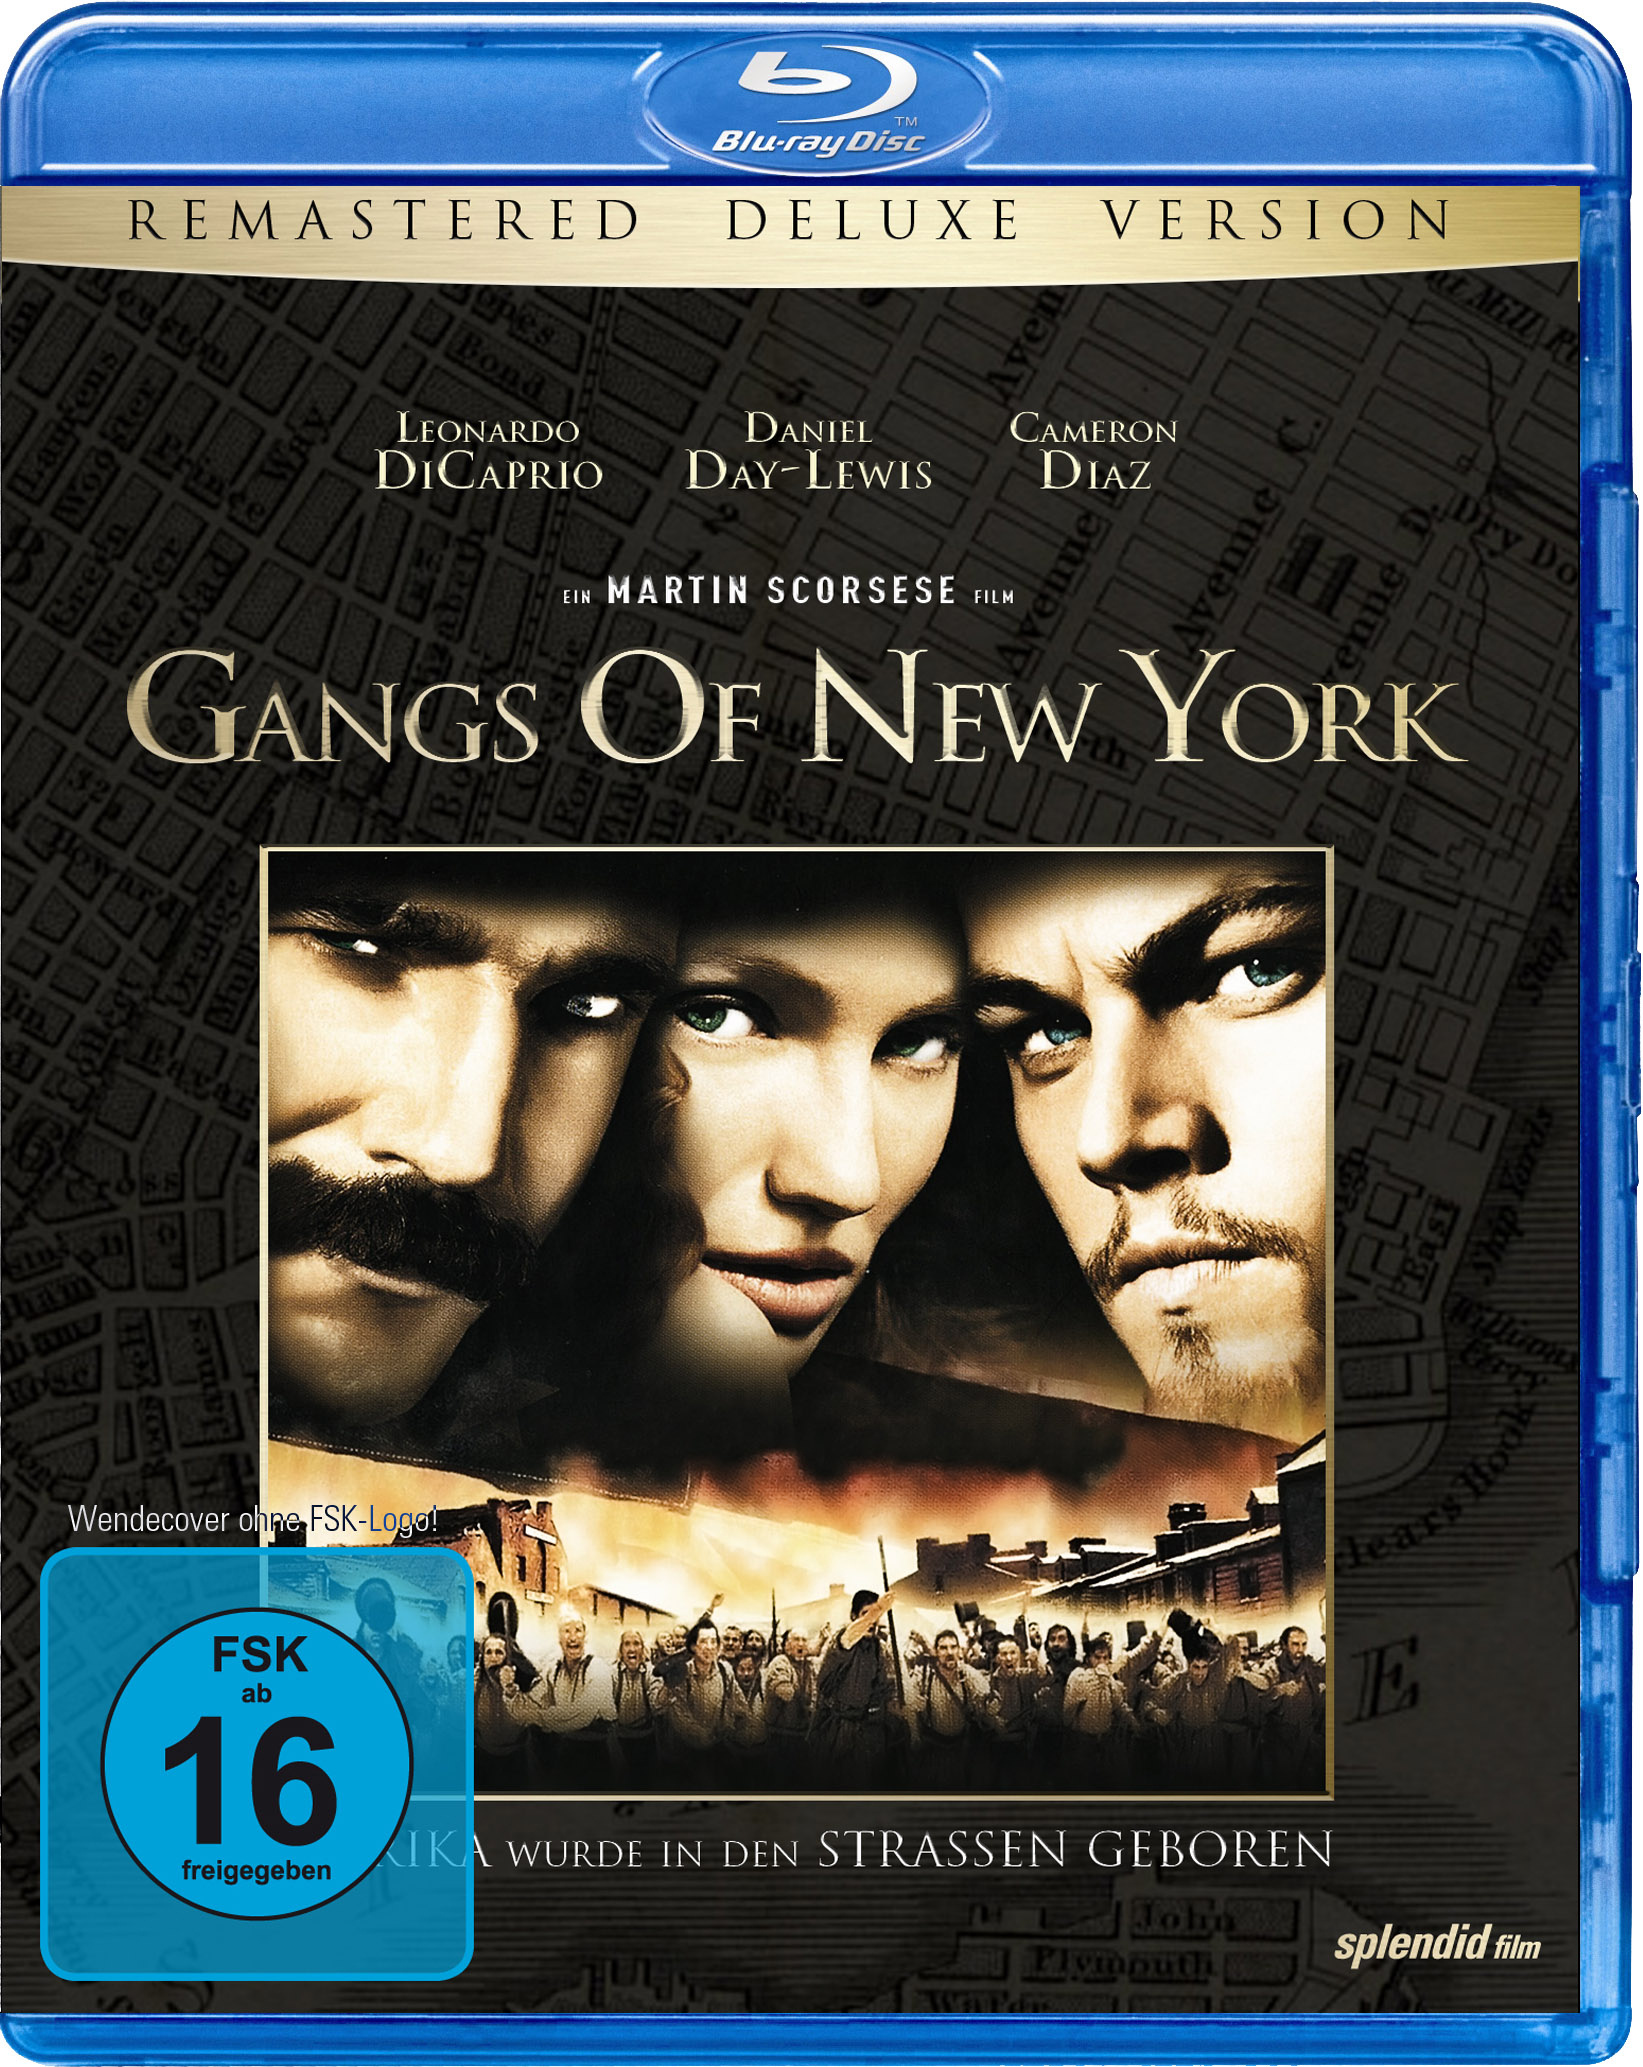 Image of Gangs of New York - Remastered